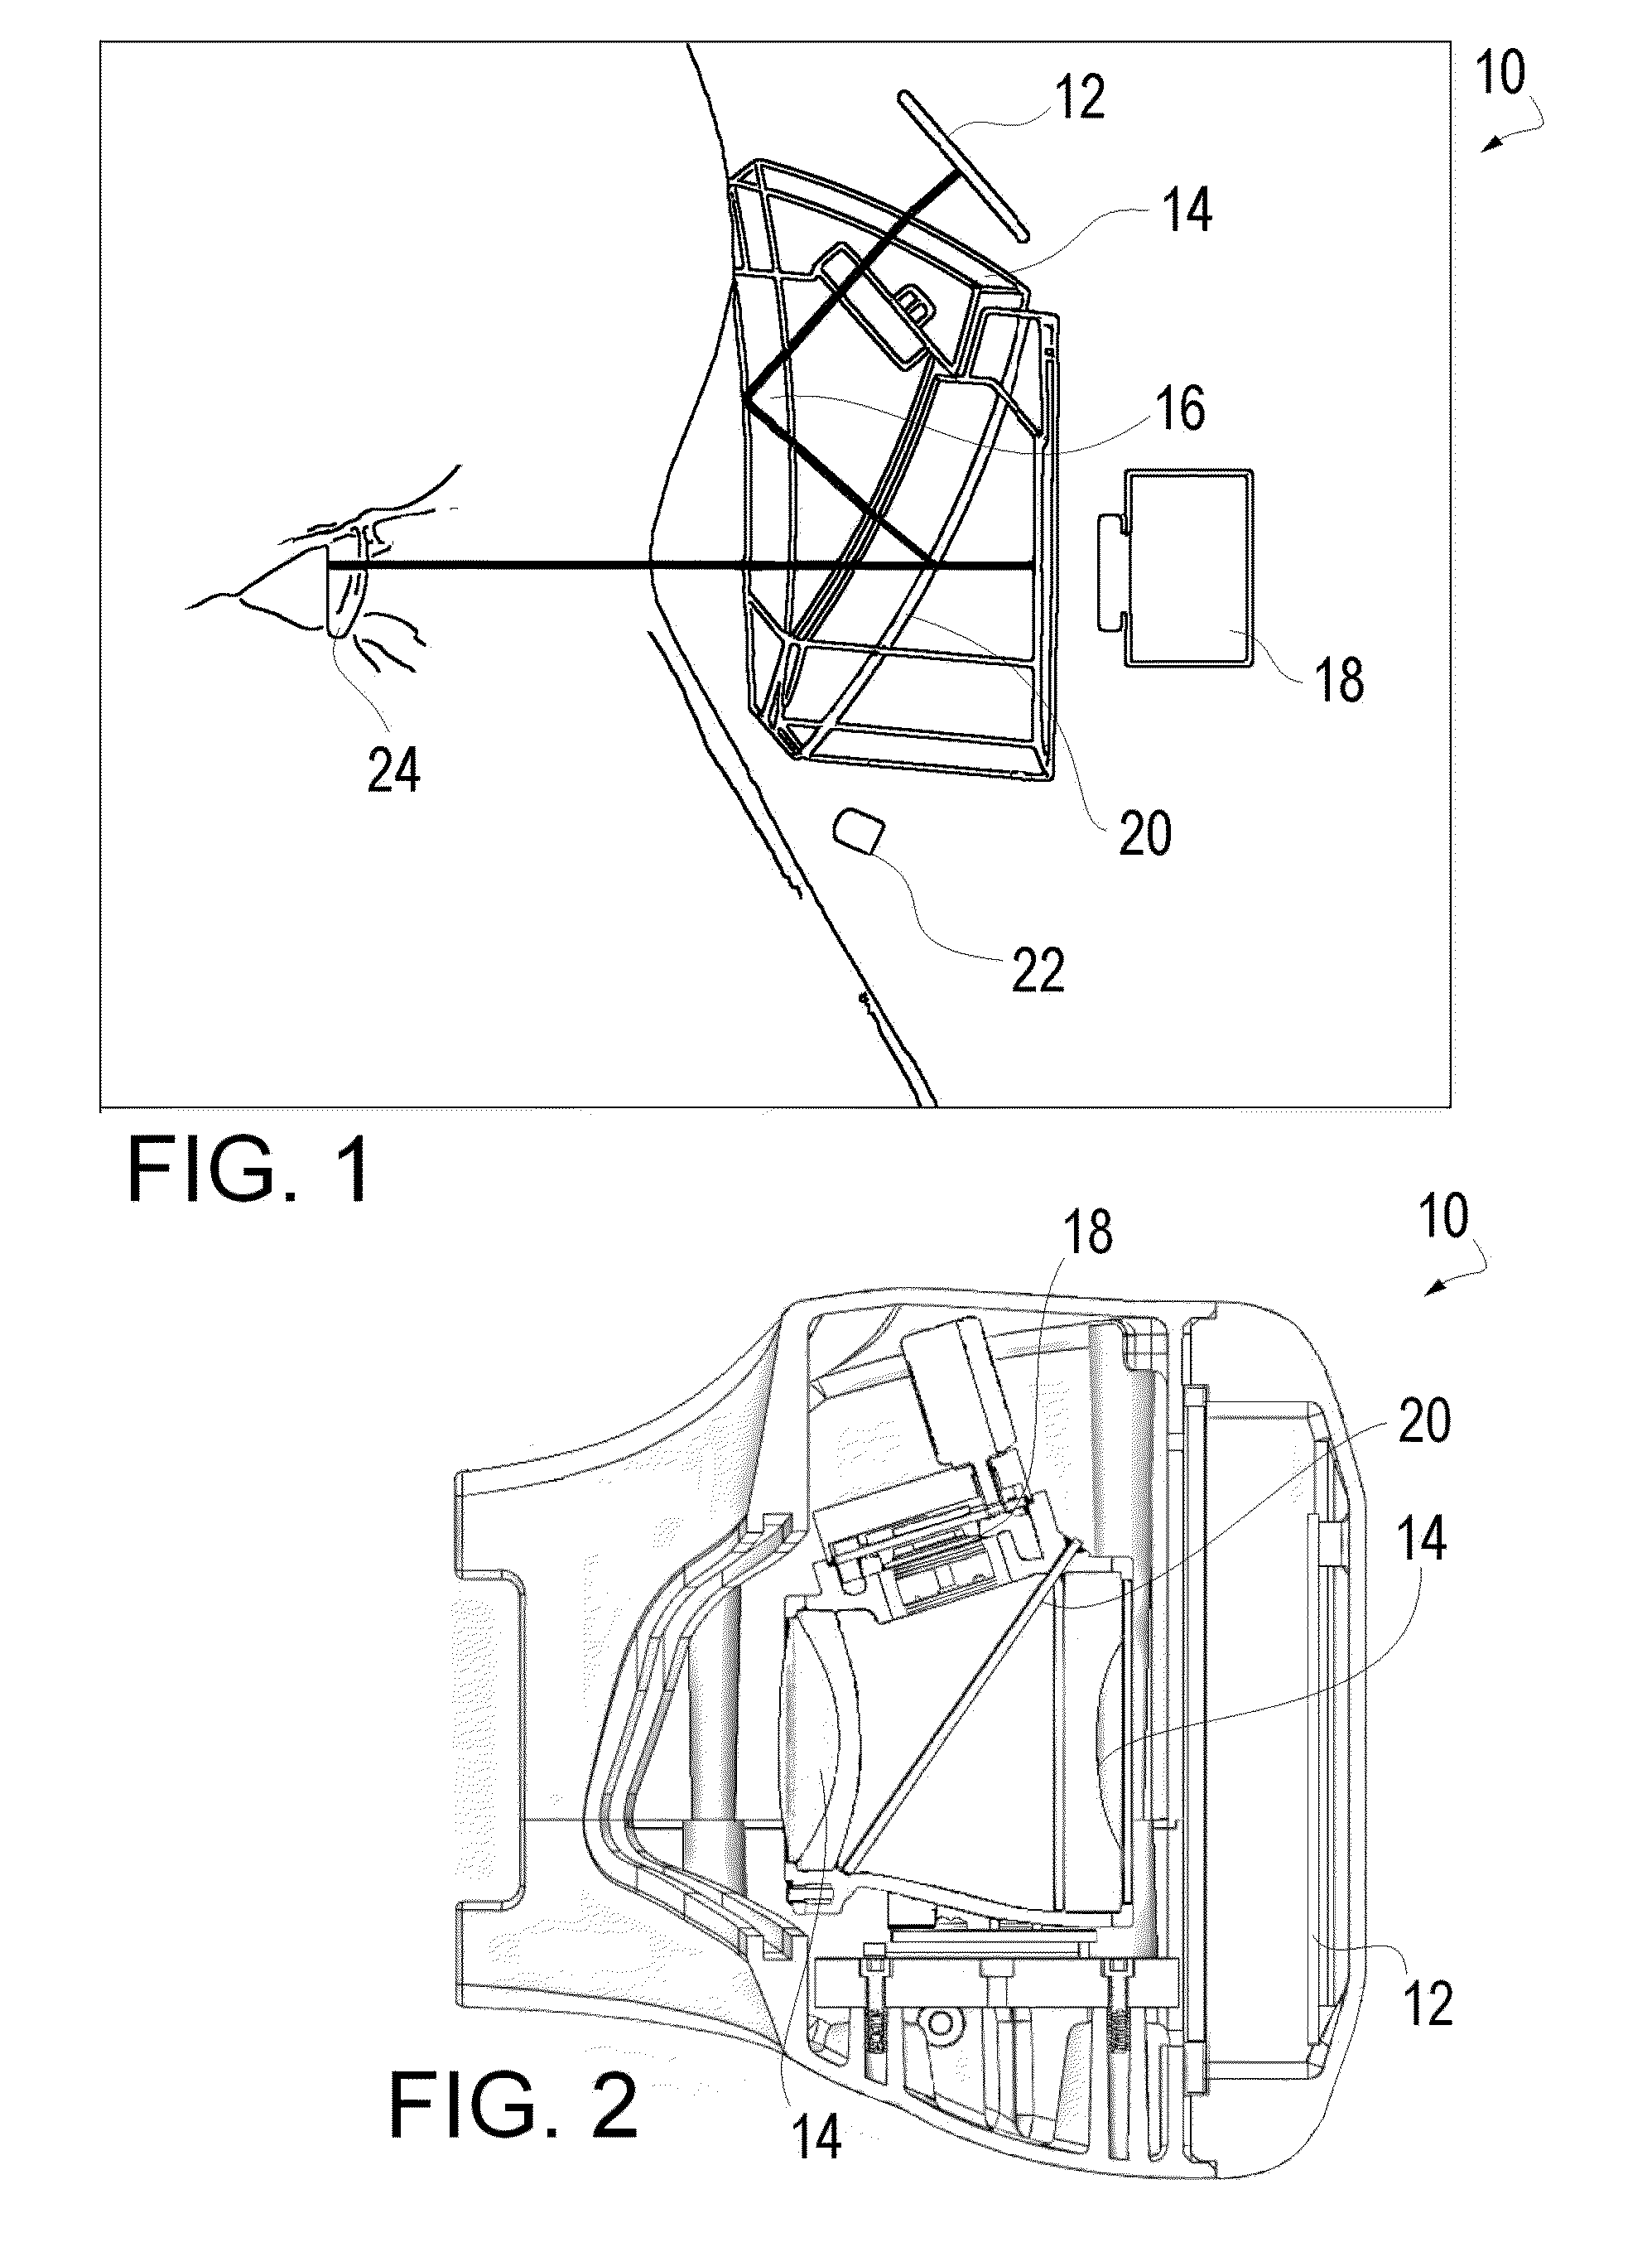 Method and Apparatus for MTBi Assessment Using Multi Variable Regression Analysis